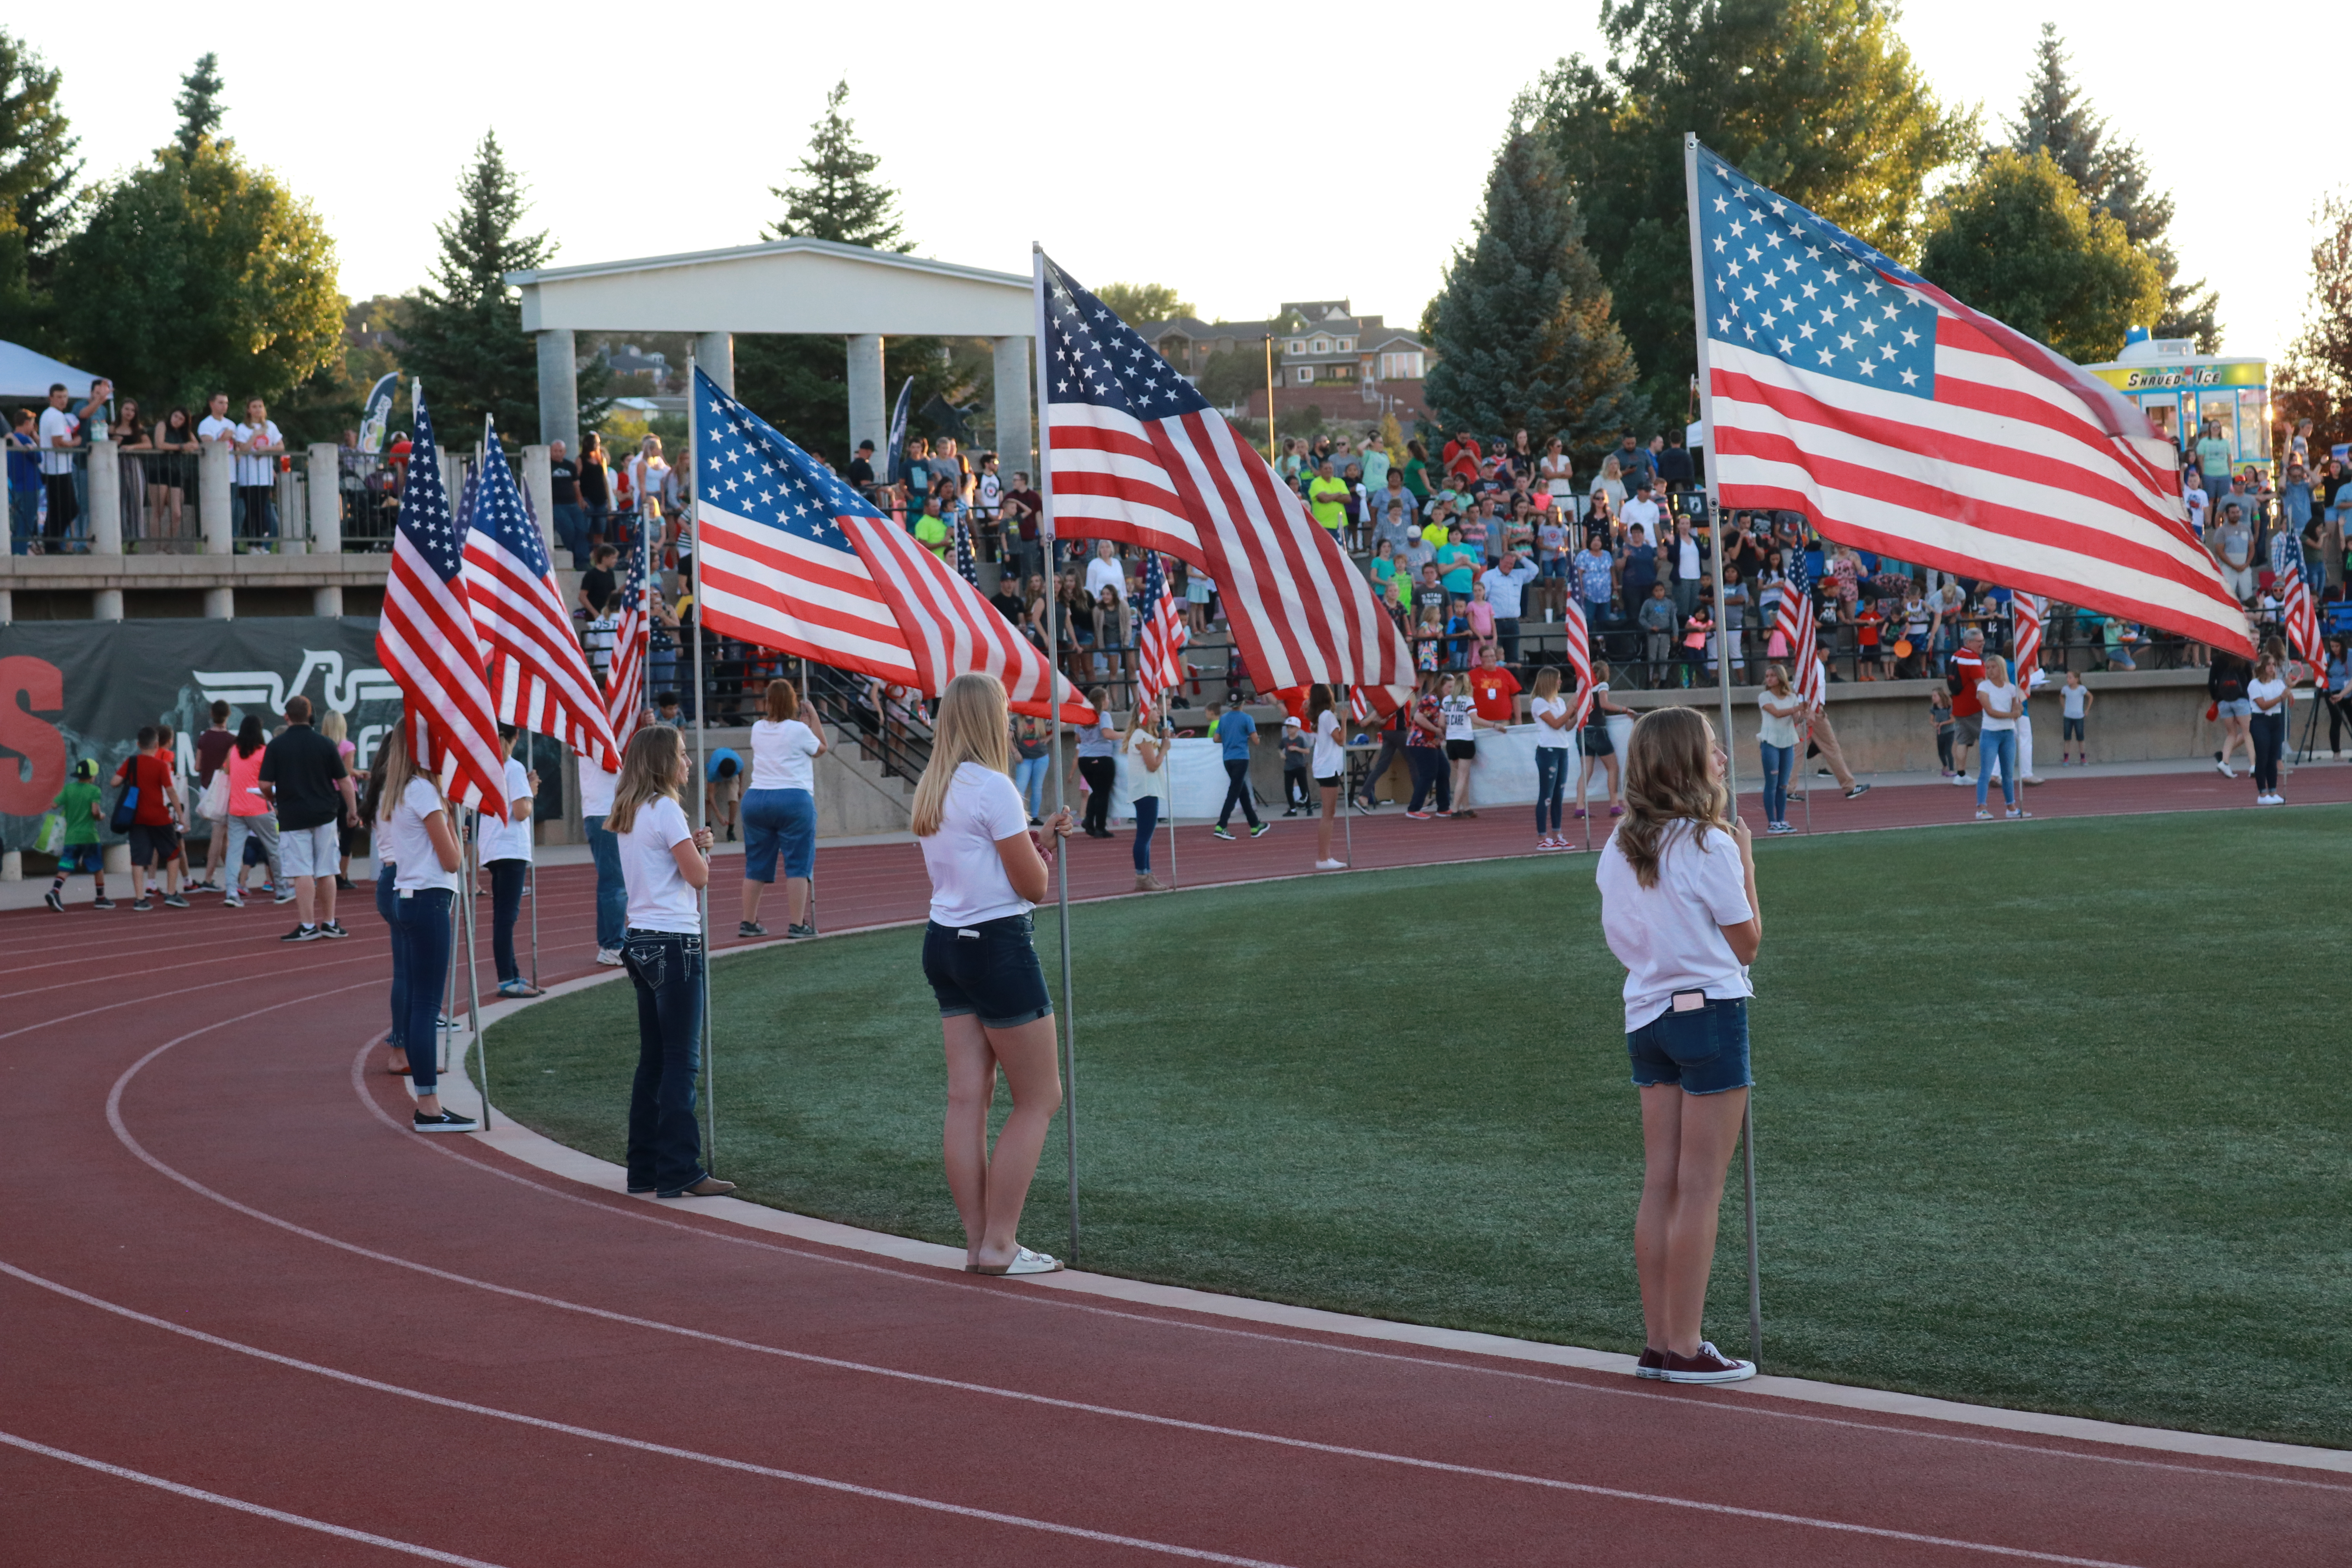 Utah Summer Games Opening Ceremony to include live music, fireworks and